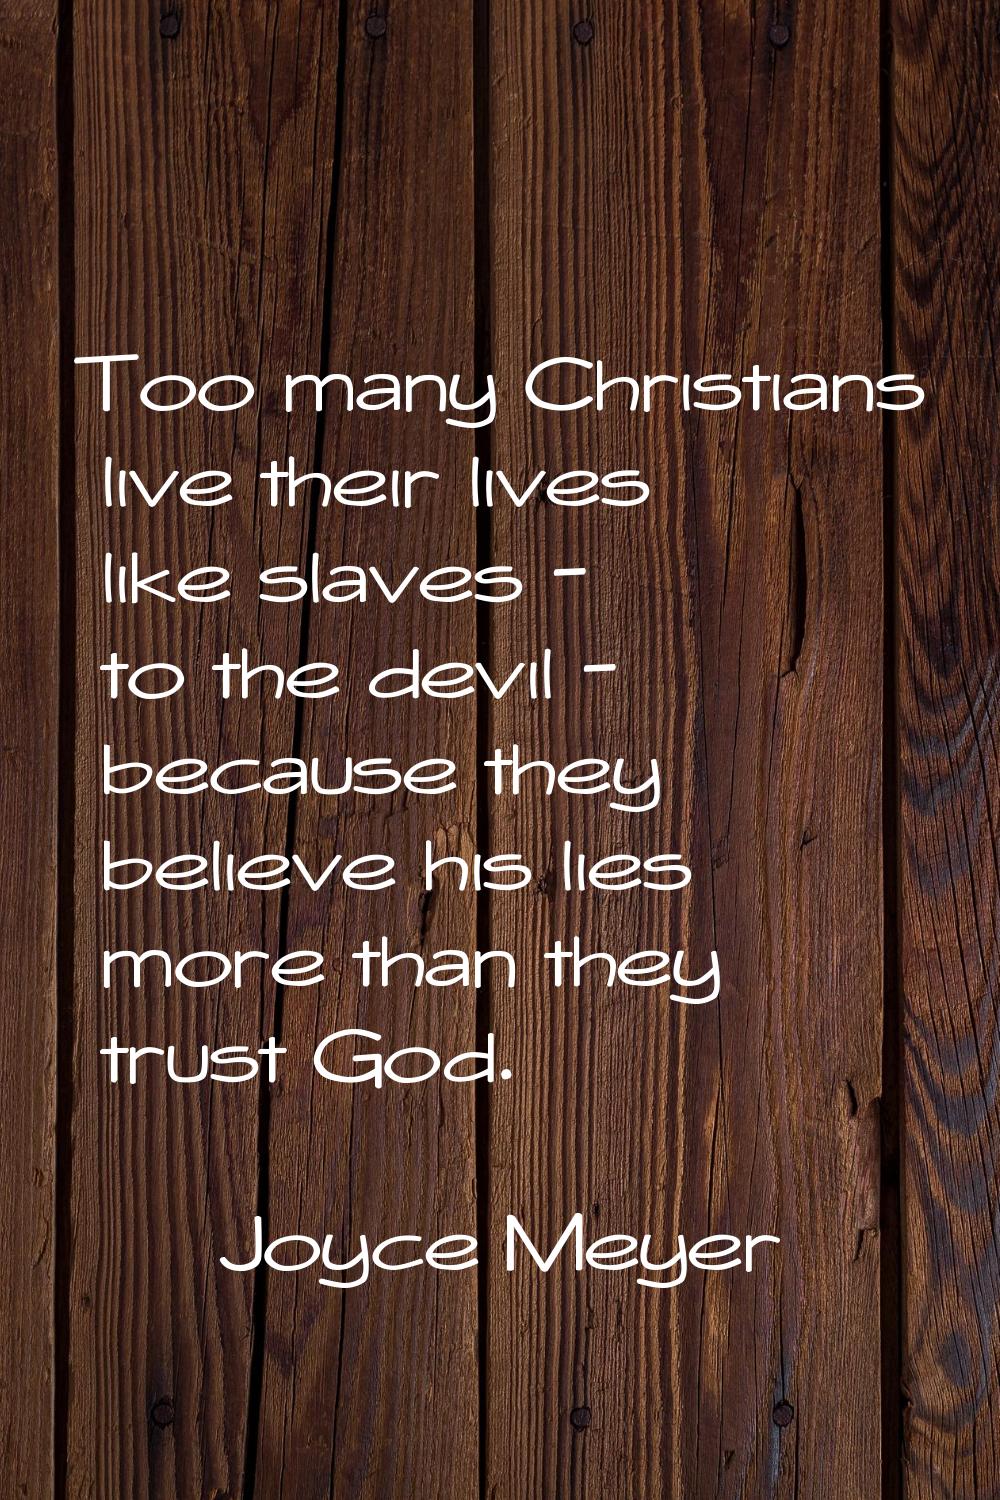 Too many Christians live their lives like slaves - to the devil - because they believe his lies mor